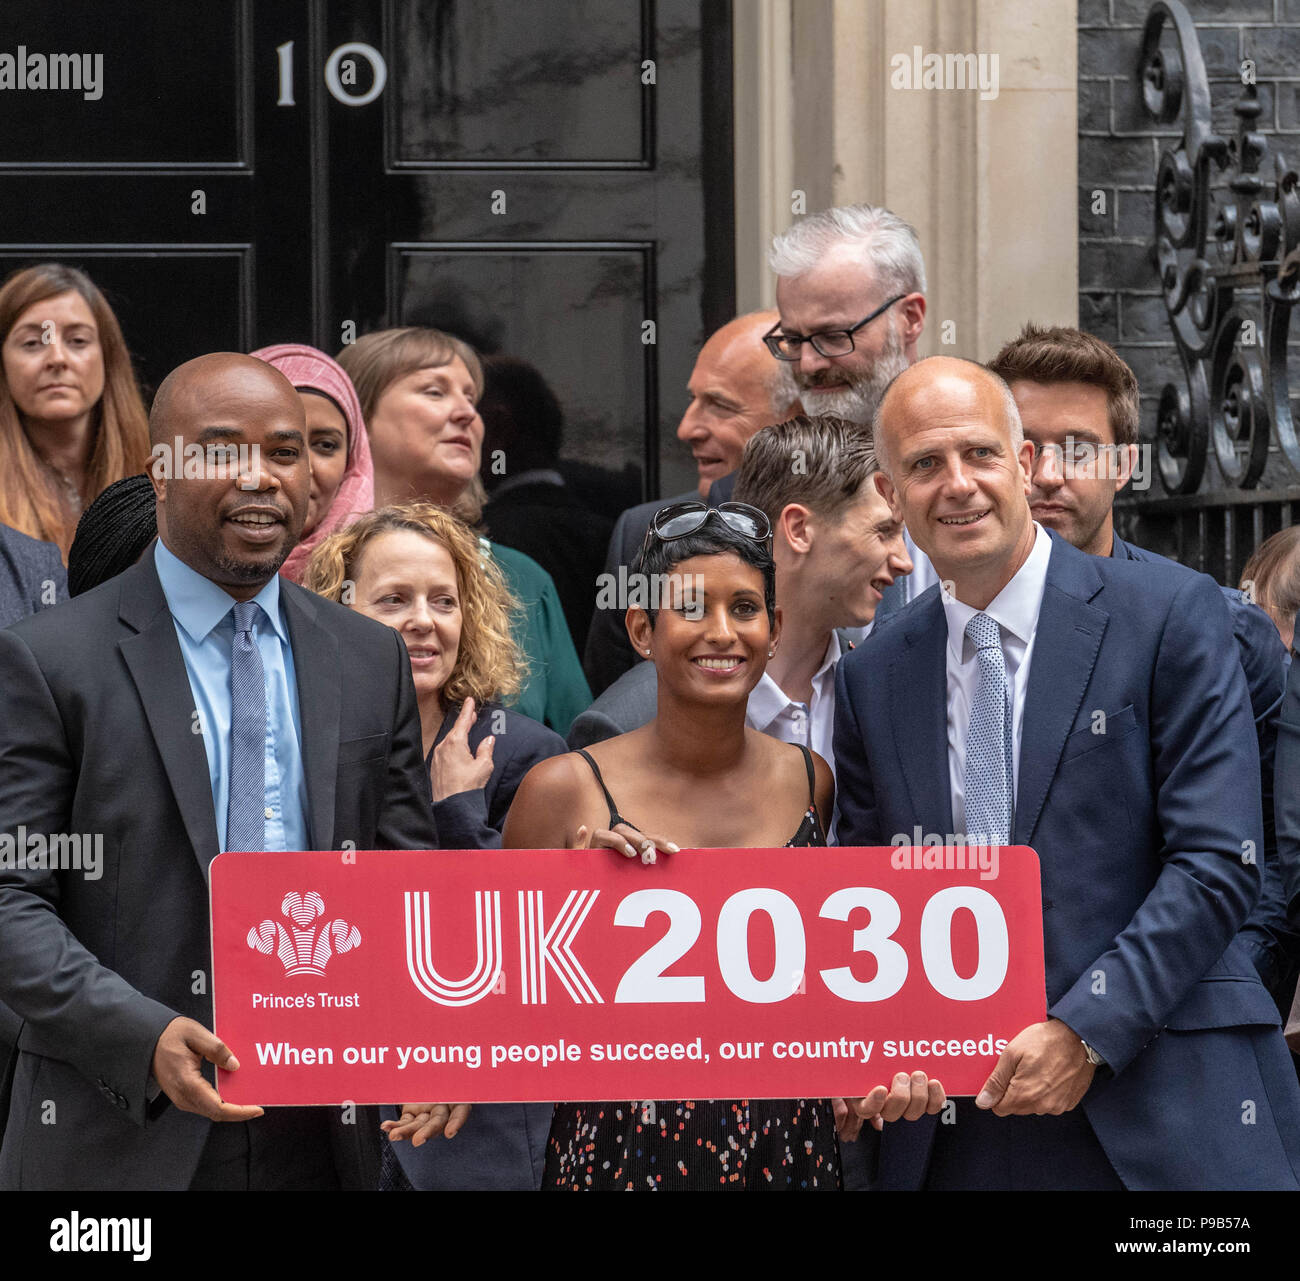 Downing Street,London 17th July 2018 Members of the Princes Trust 2030 Youth Taskforce launch their initiative at 10 Downing Street including Naga Munchetty BBC News presenter Cahir of the taskforce Credit: Ian Davidson/Alamy Live News Stock Photo